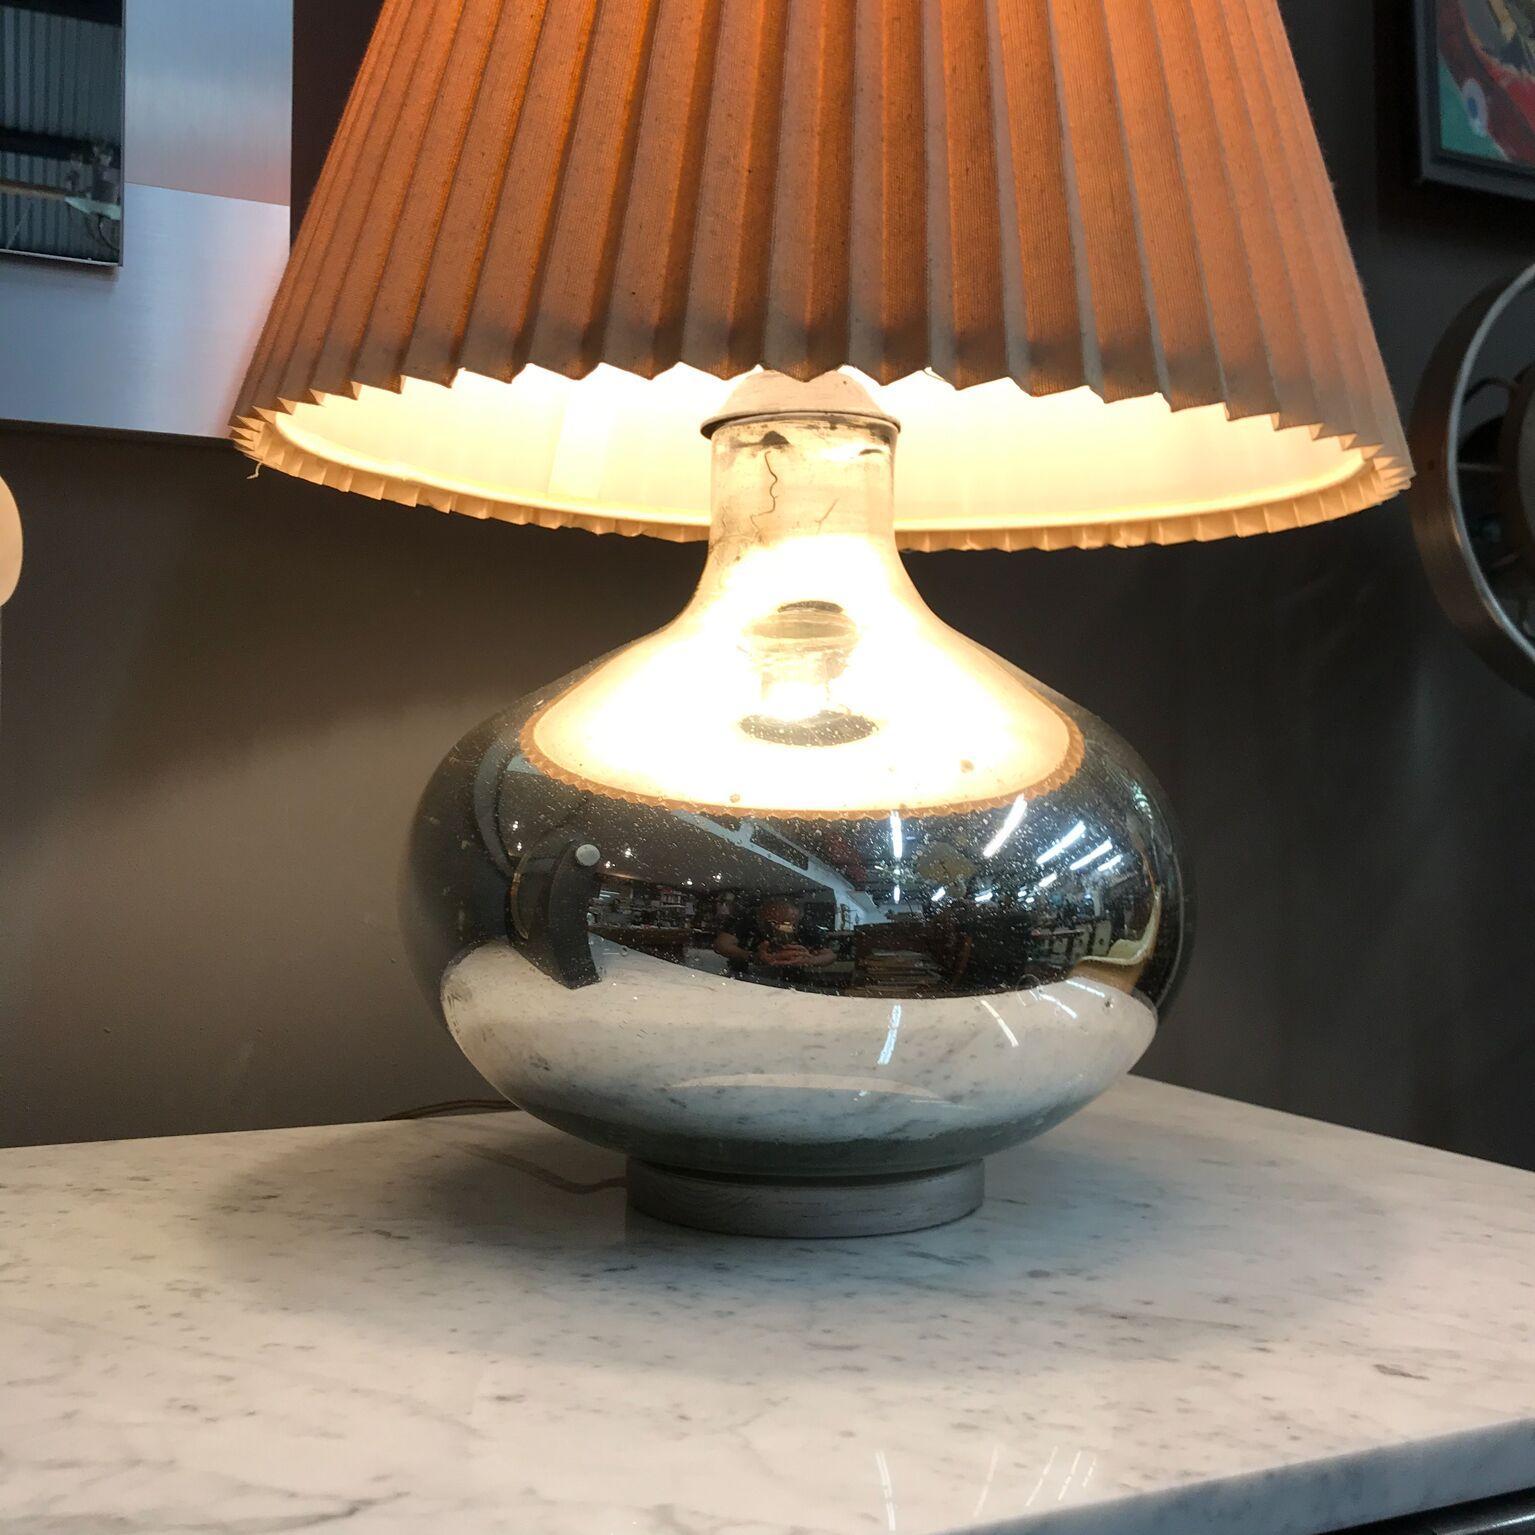 Magnificent Mercury Glass Round Table Lamp Mexico circa 1950s.
Styled after Luis Barragan Hugo Velazquez. Unmarked.
15.25 H X 12.5 In diameter
Original Unrestored Vintage Condition. No shade is included.
Please see images. 

